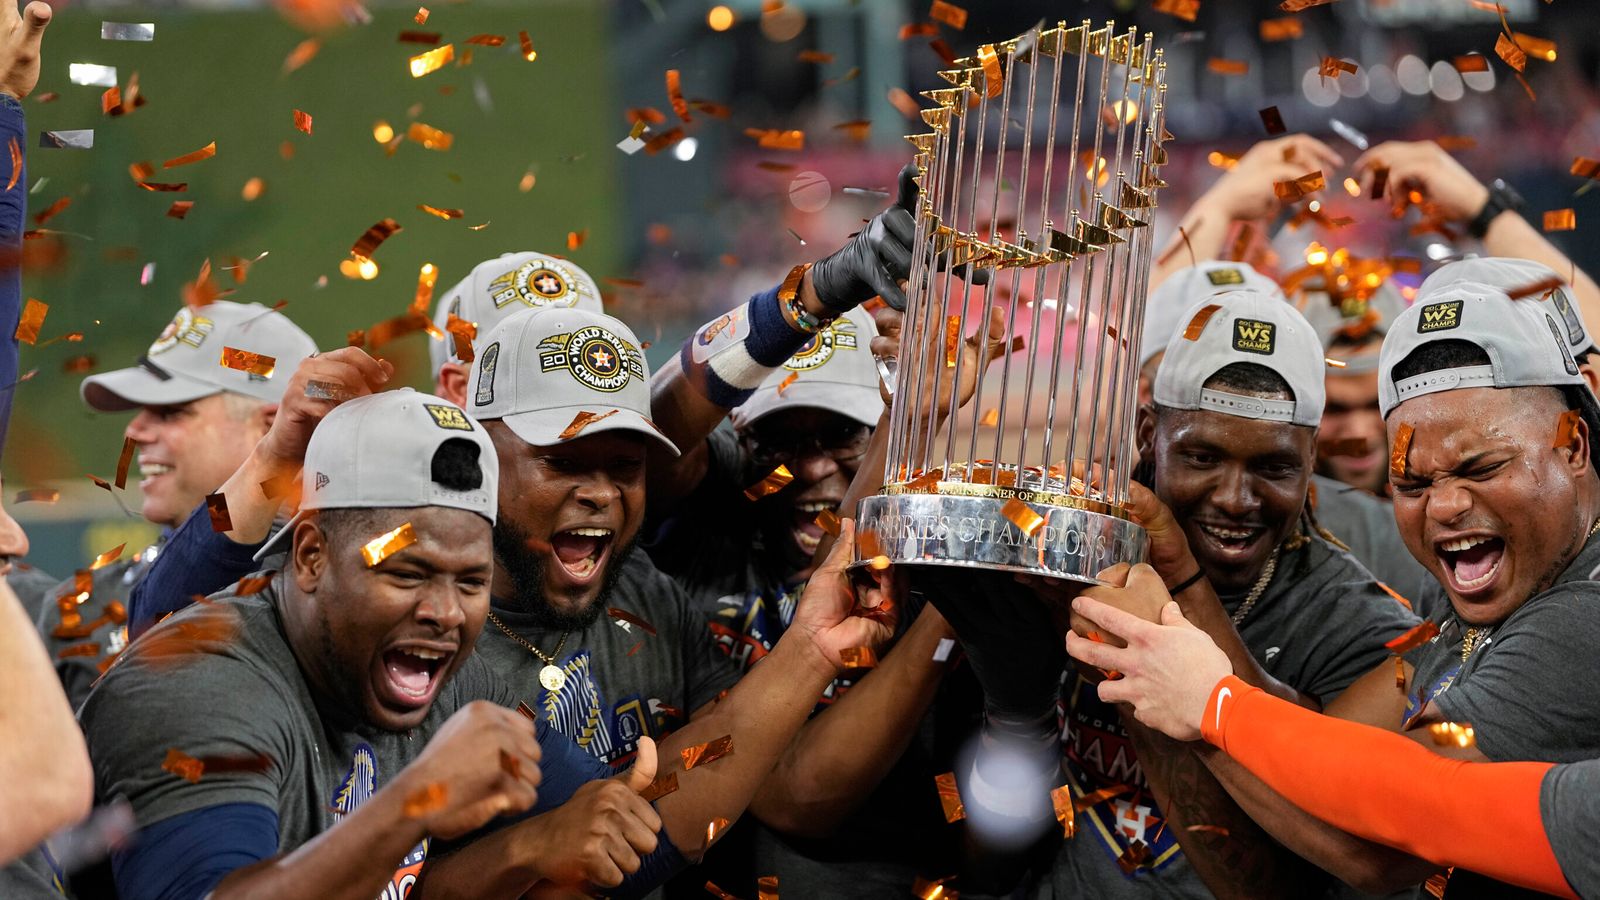 Astros claim World Series title with 4-1 win over Phillies